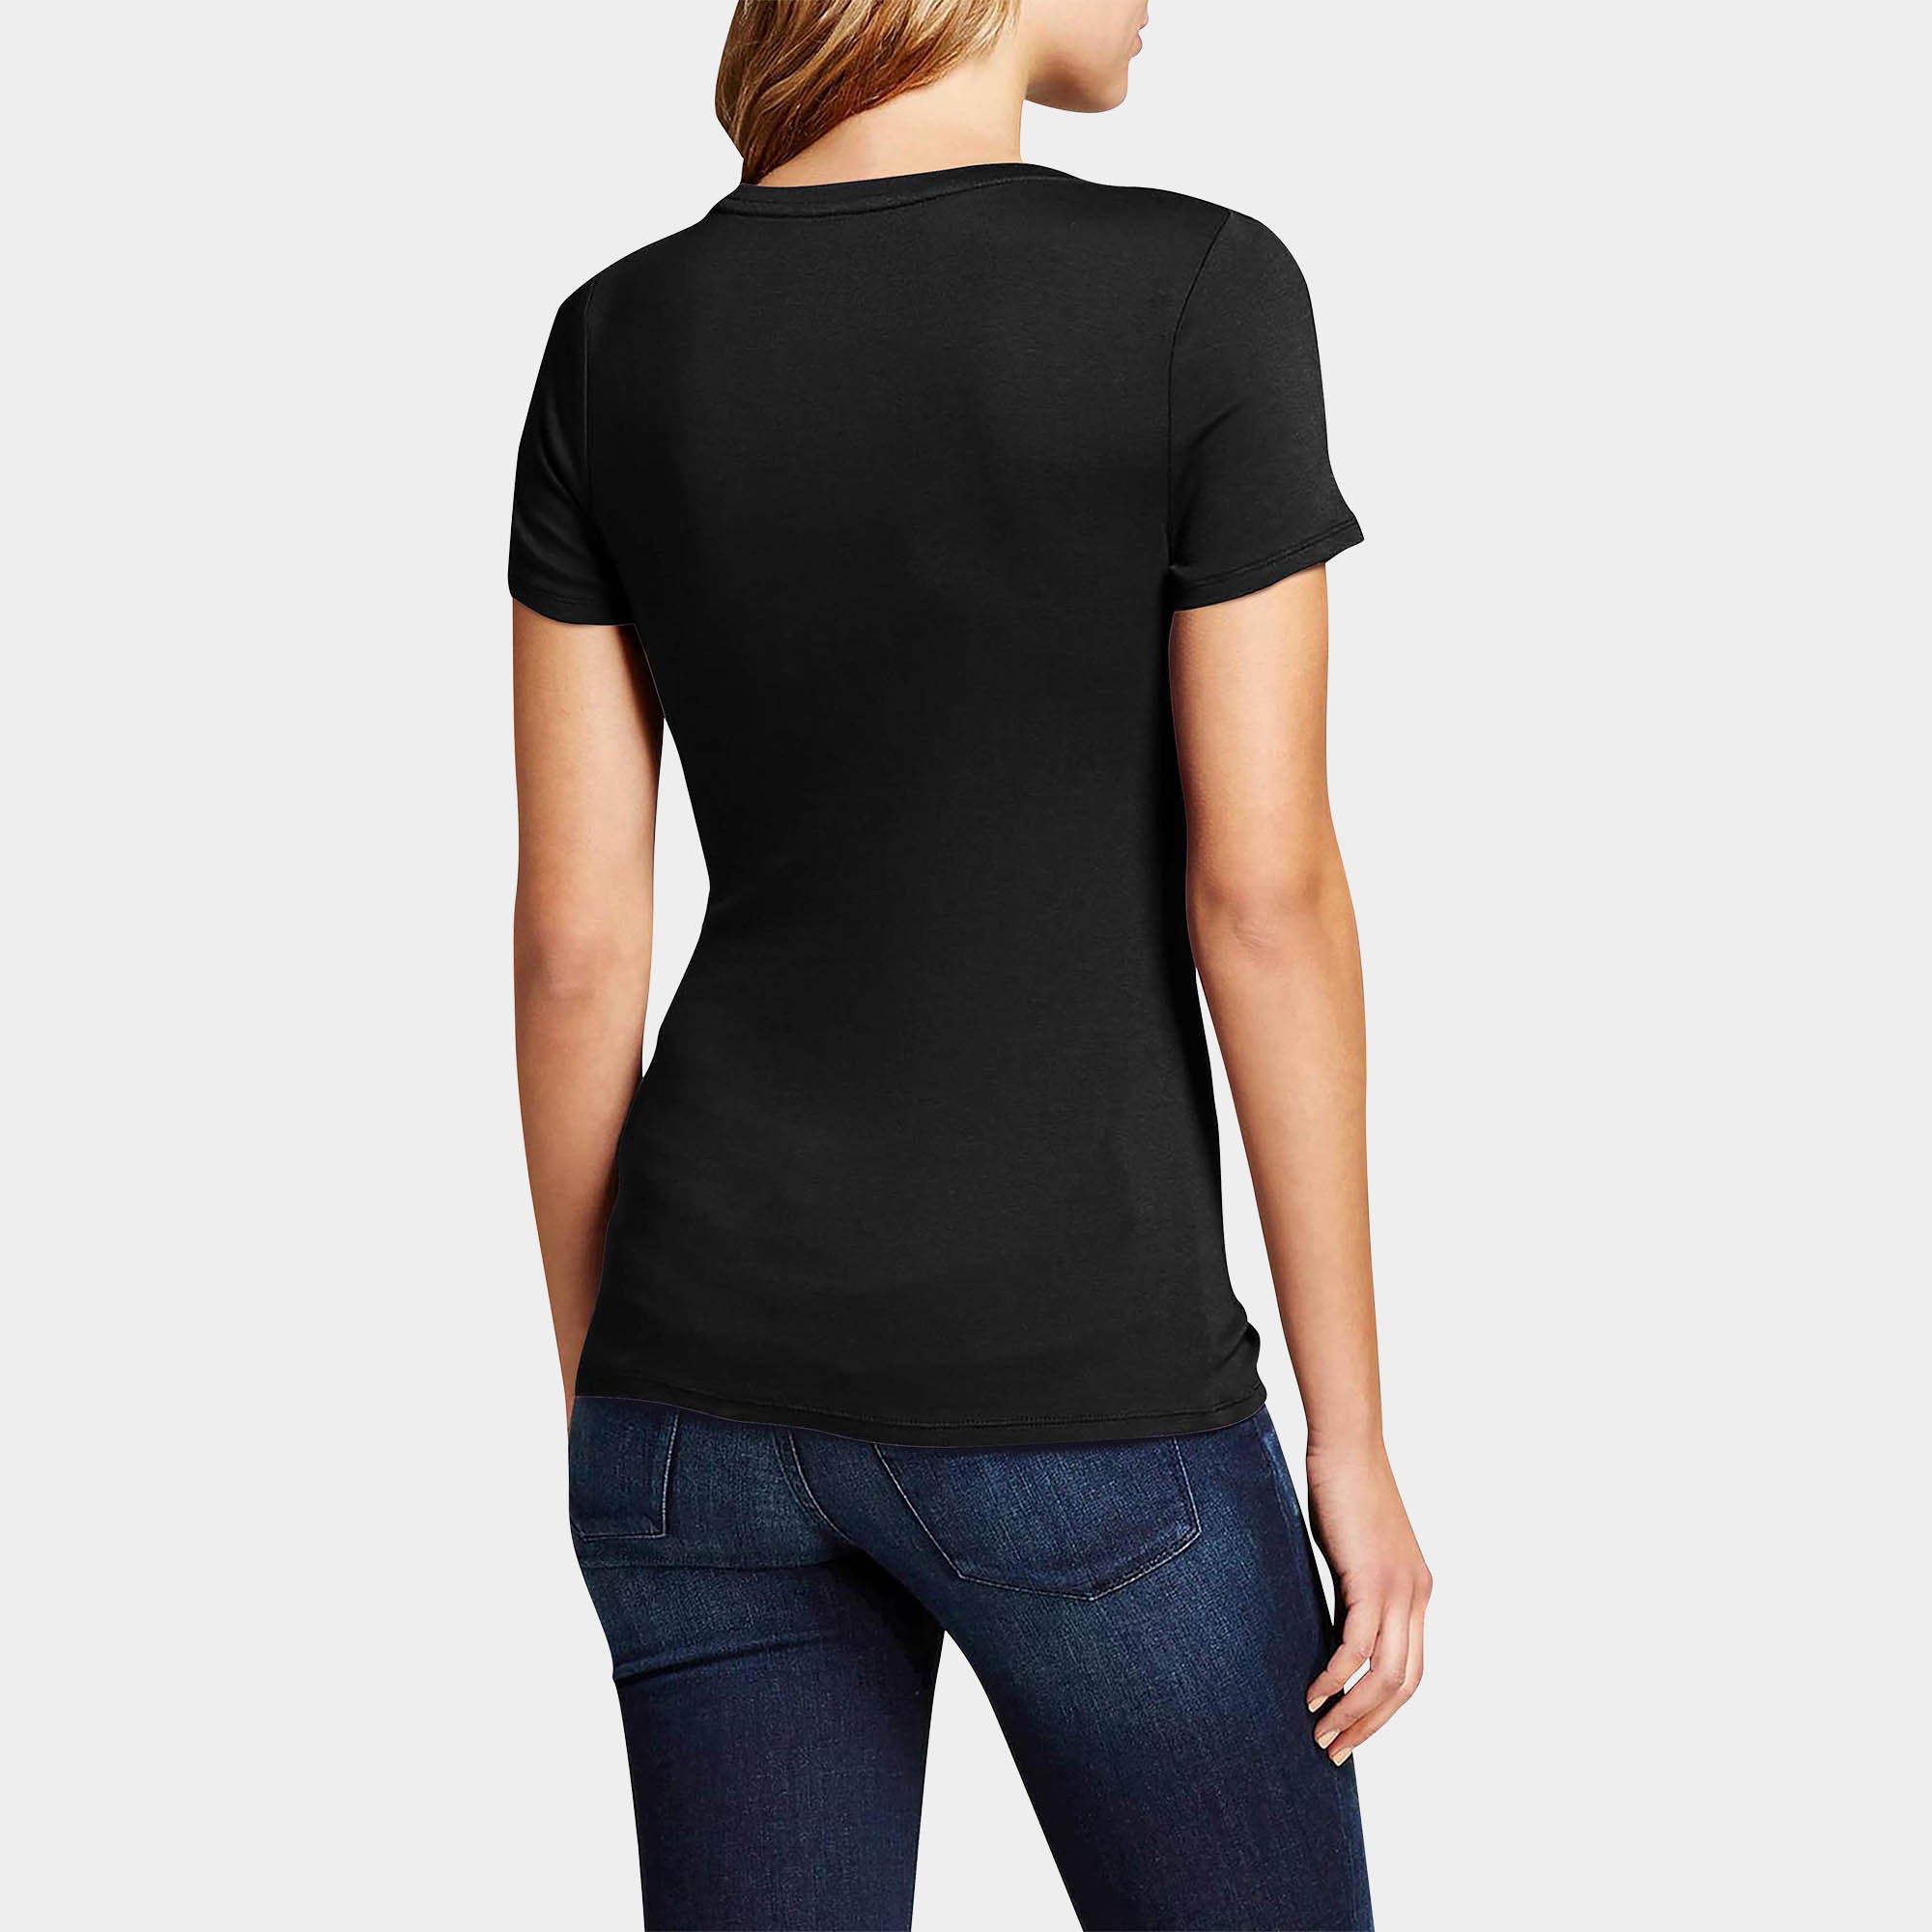 comfort tee_comfort color tees_comfort colors tee shirts_womens tee_tee shirts for women_best quality t shirts for women_Black